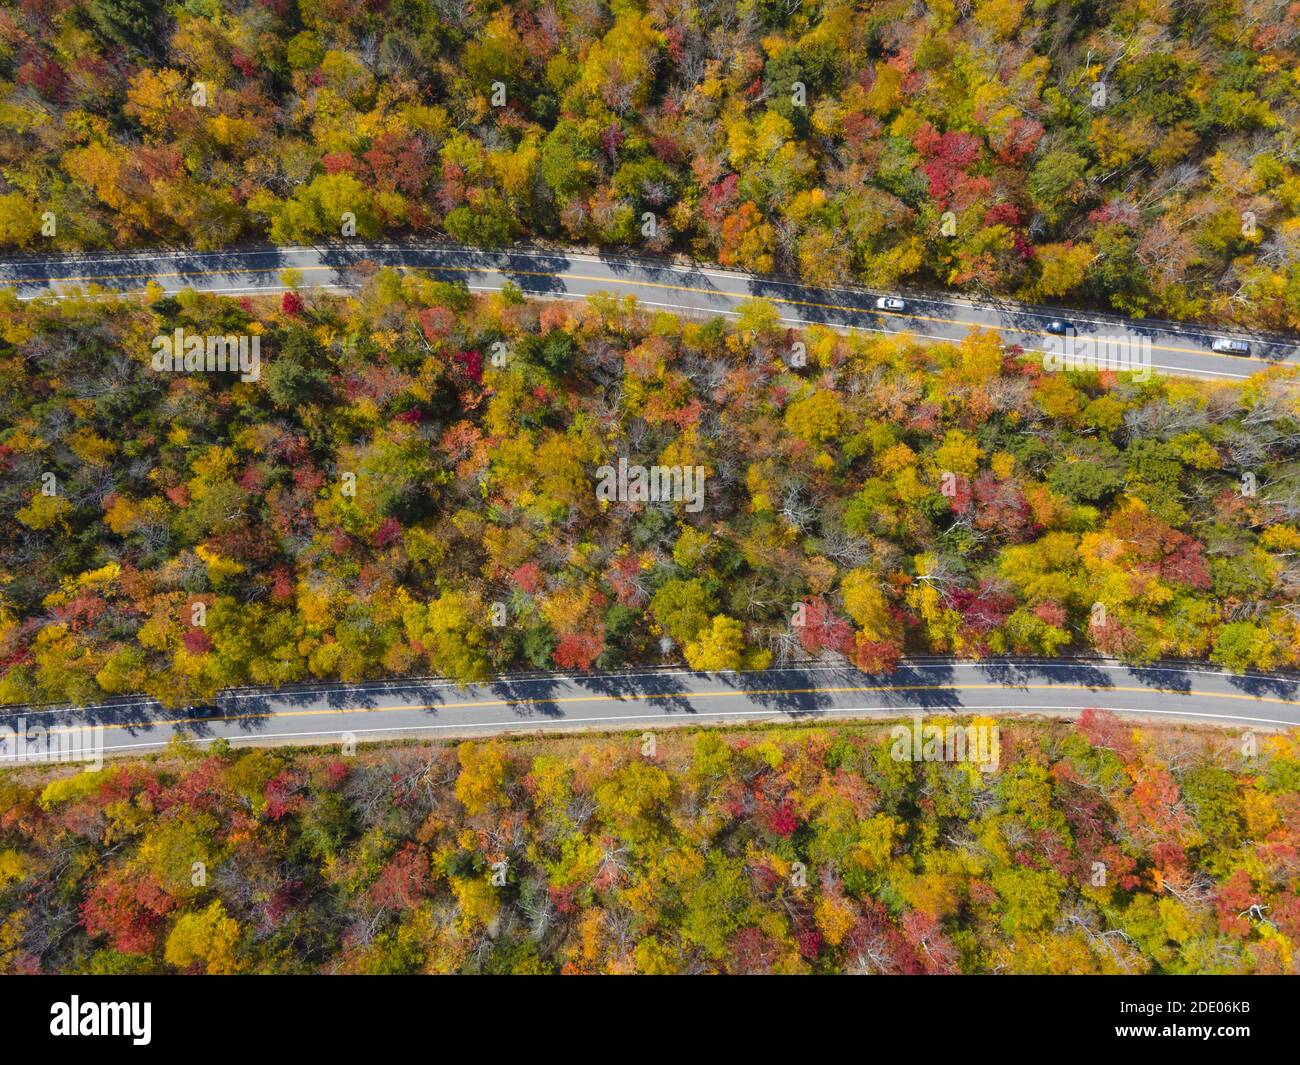 White Mountain National Forest fall foliage on Kancamagus Highway near Hancock Notch top view, Town of Lincoln, New Hampshire NH, USA. Stock Photo